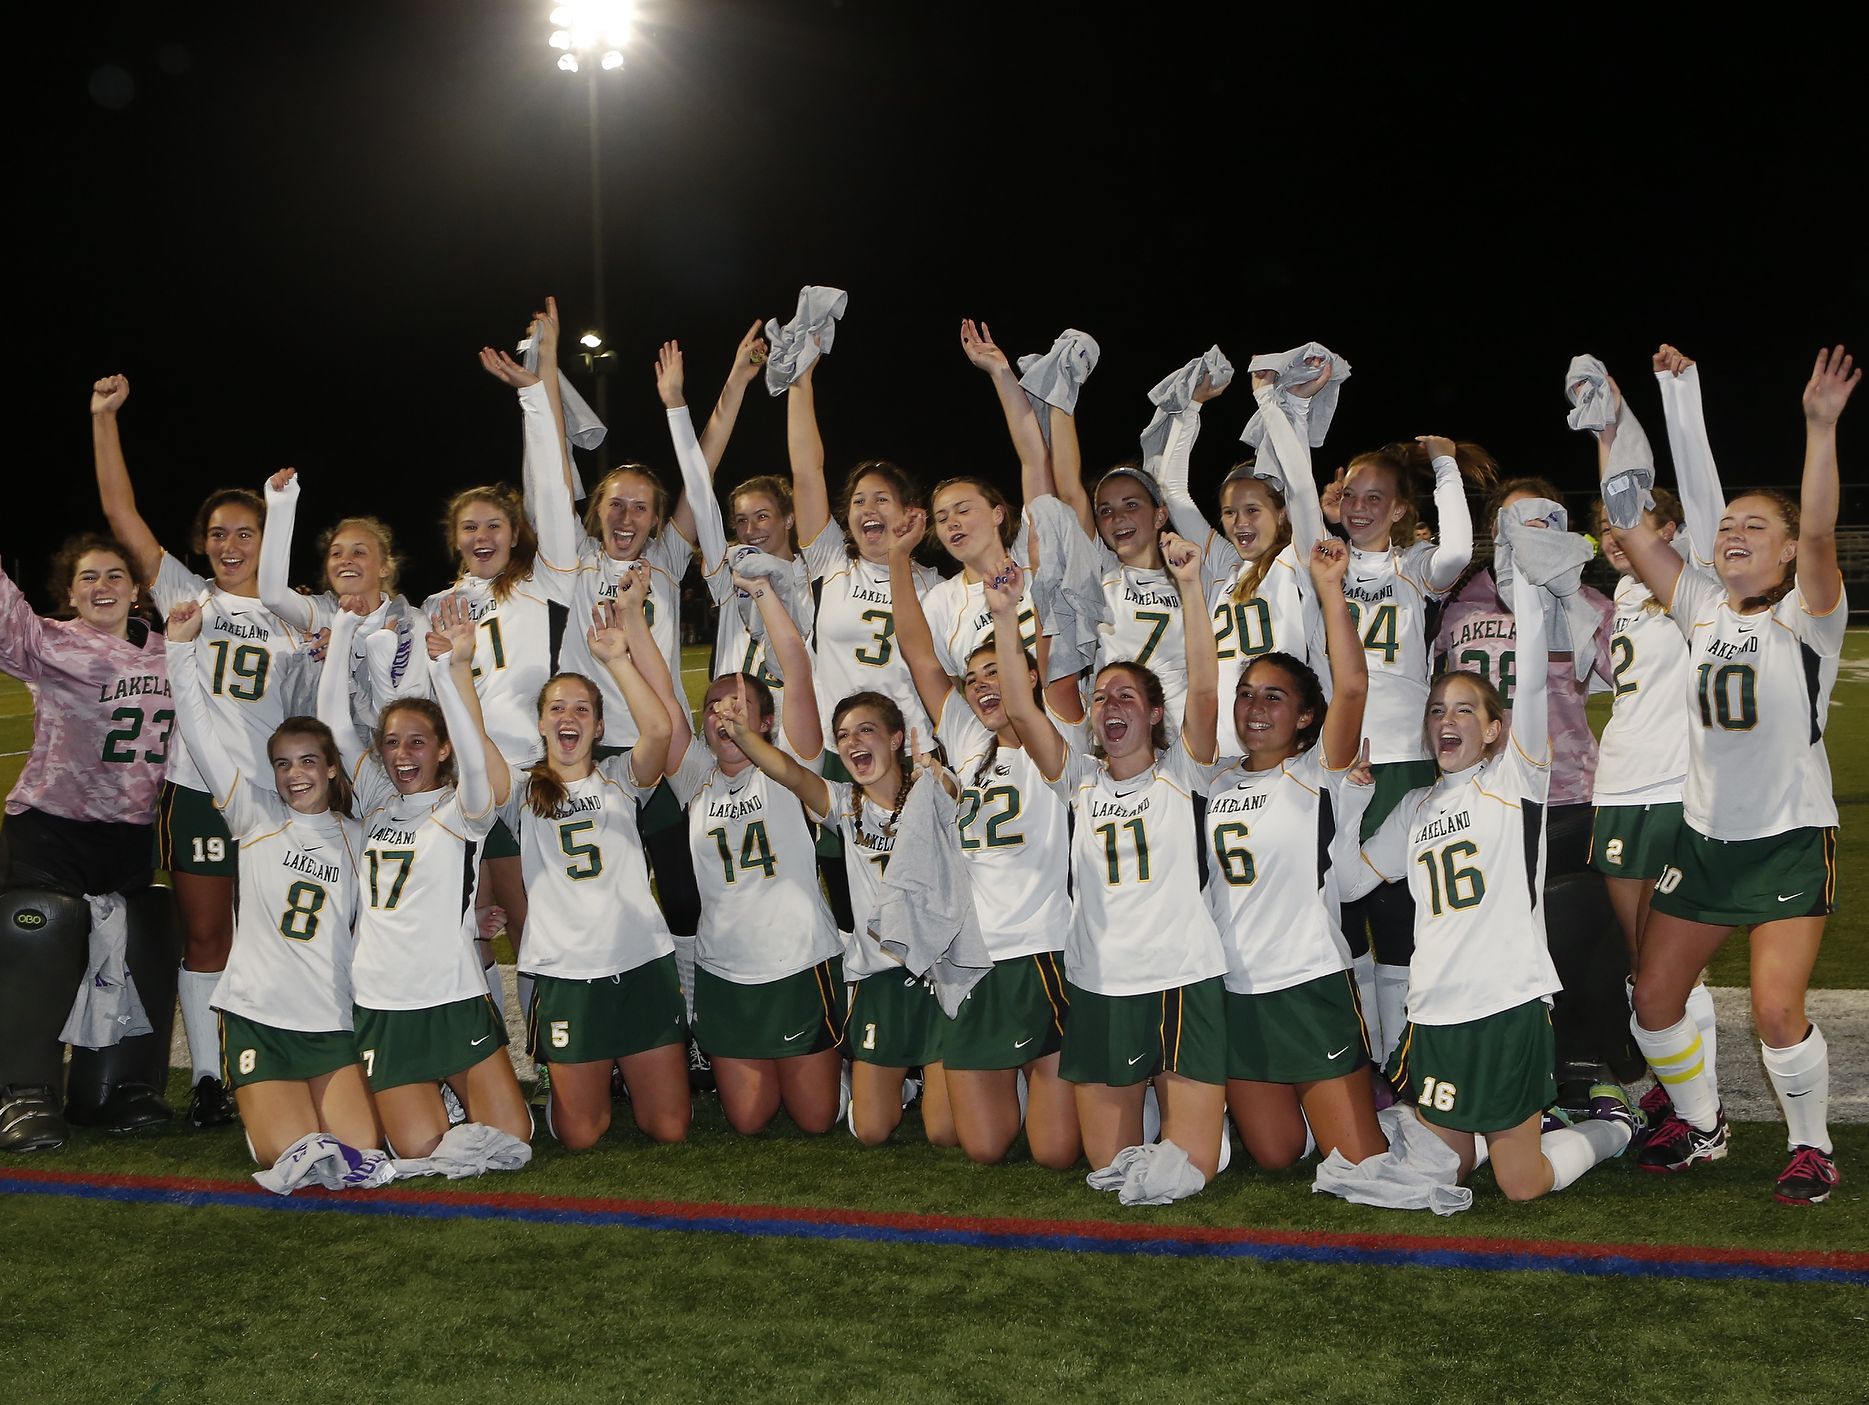 Lakeland players celebrate their 4-1 win over Rye in the Class B field hockey section finals at Brewster High School on Tuesday, November 1, 2016.